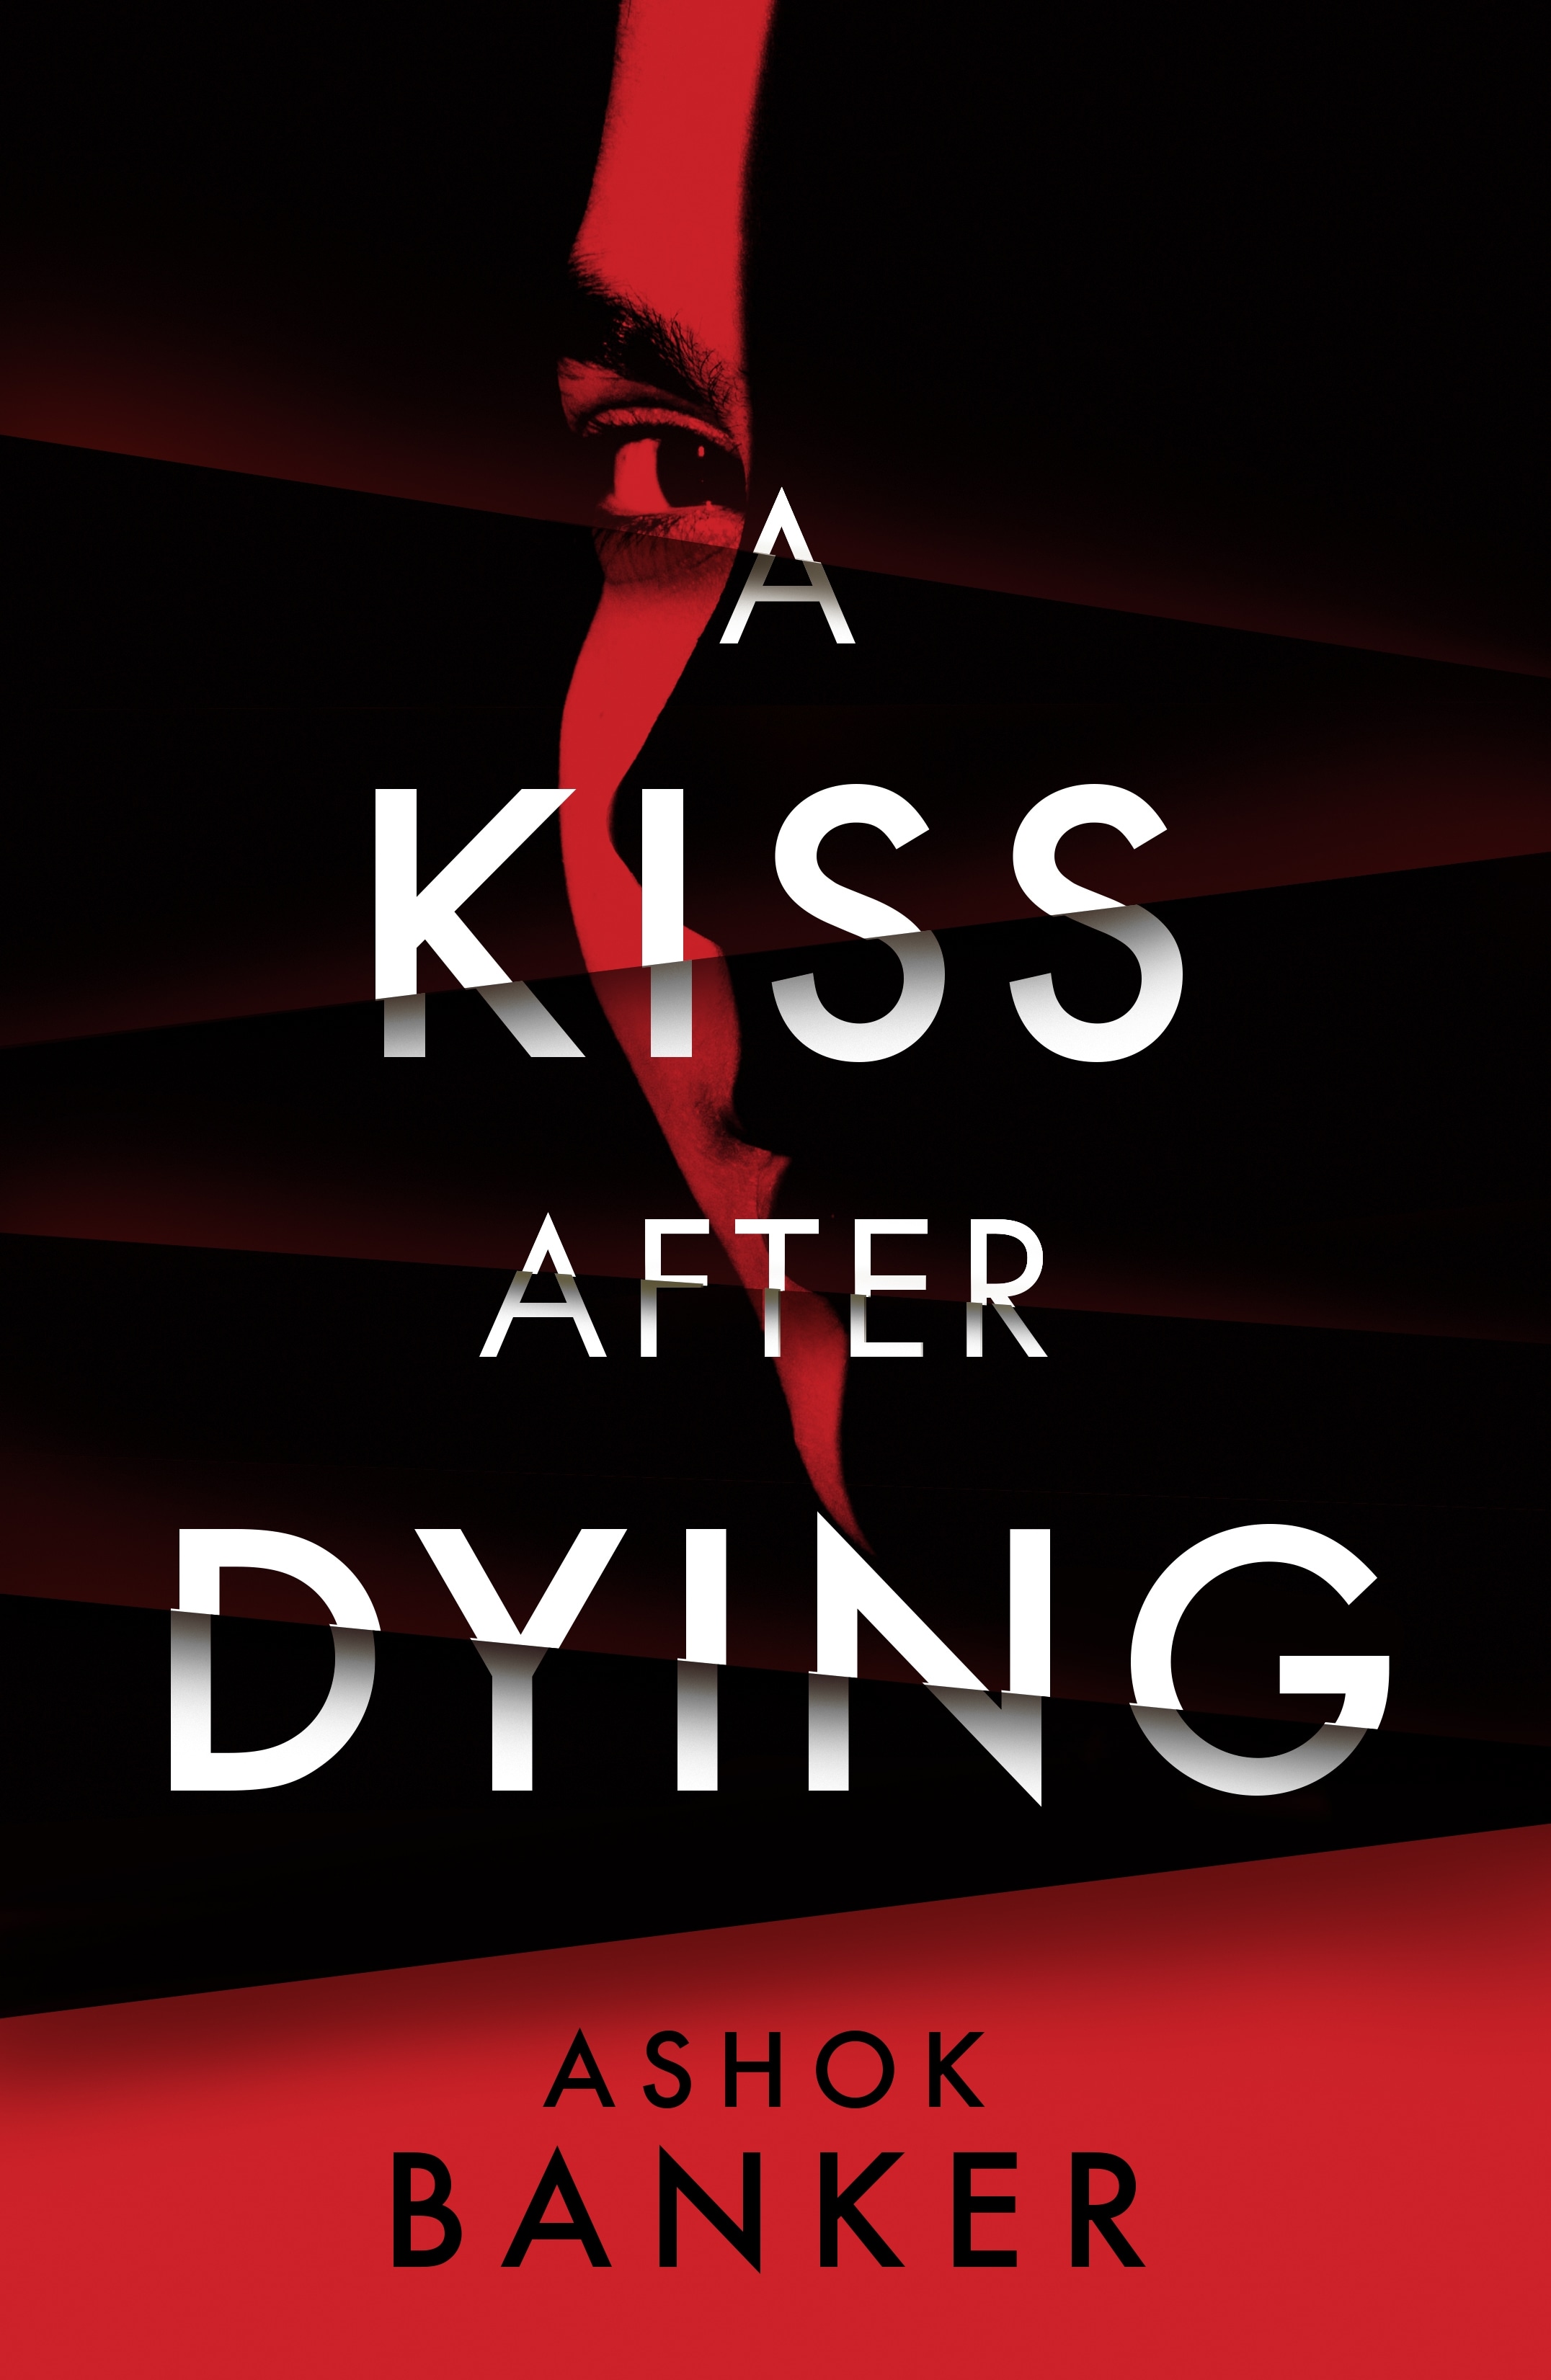 Book “A Kiss After Dying” by Ashok Banker — May 12, 2022